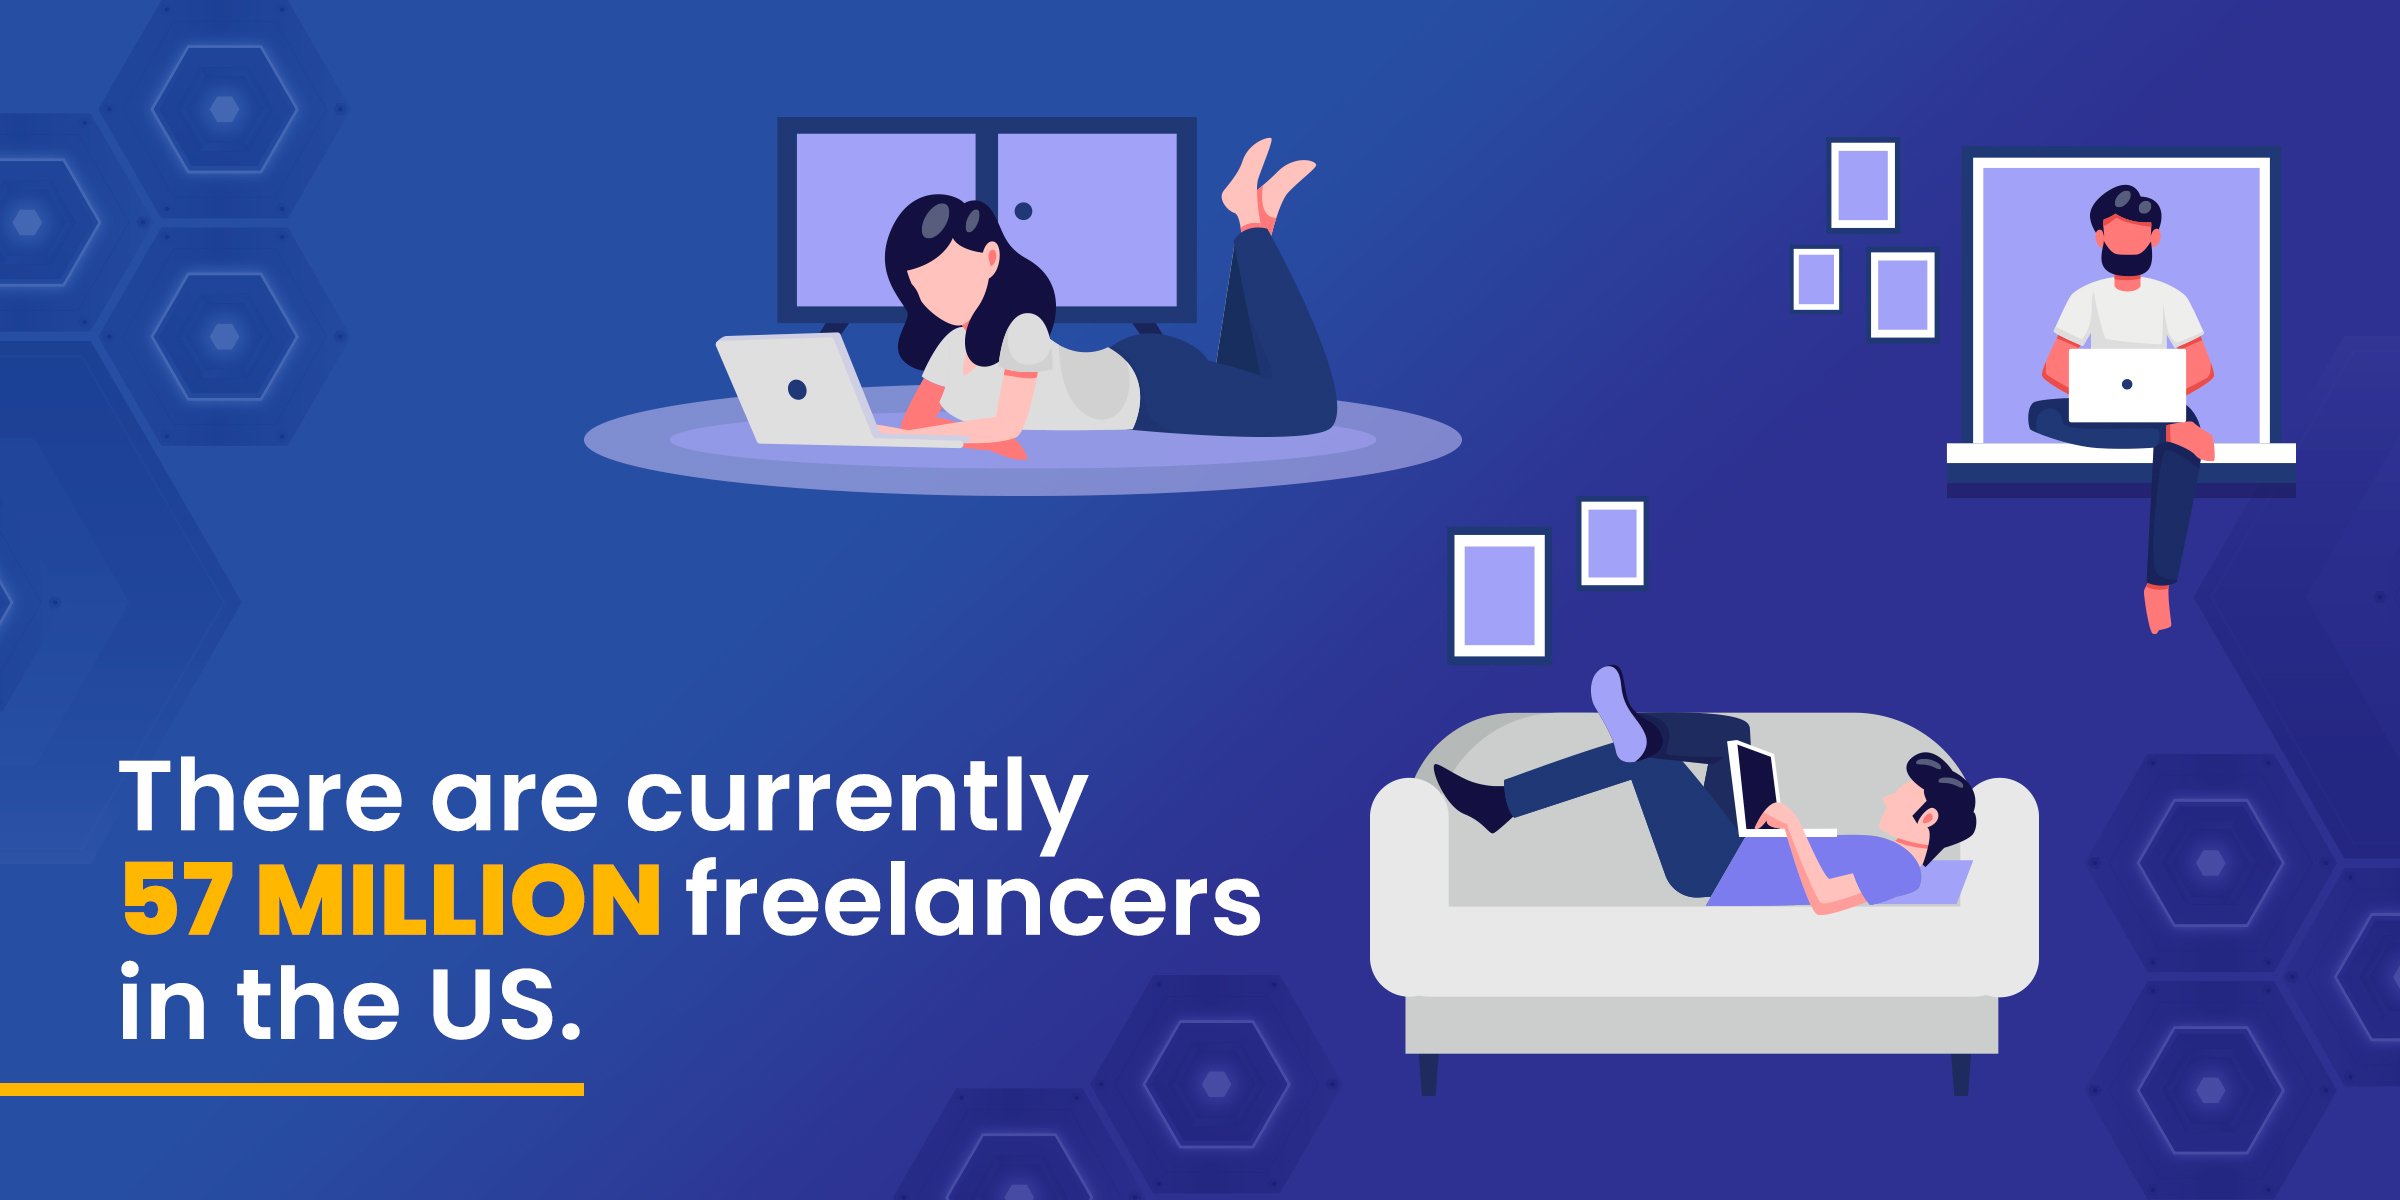 Freelance Statistics - There are currently 57 million freelancers in the US